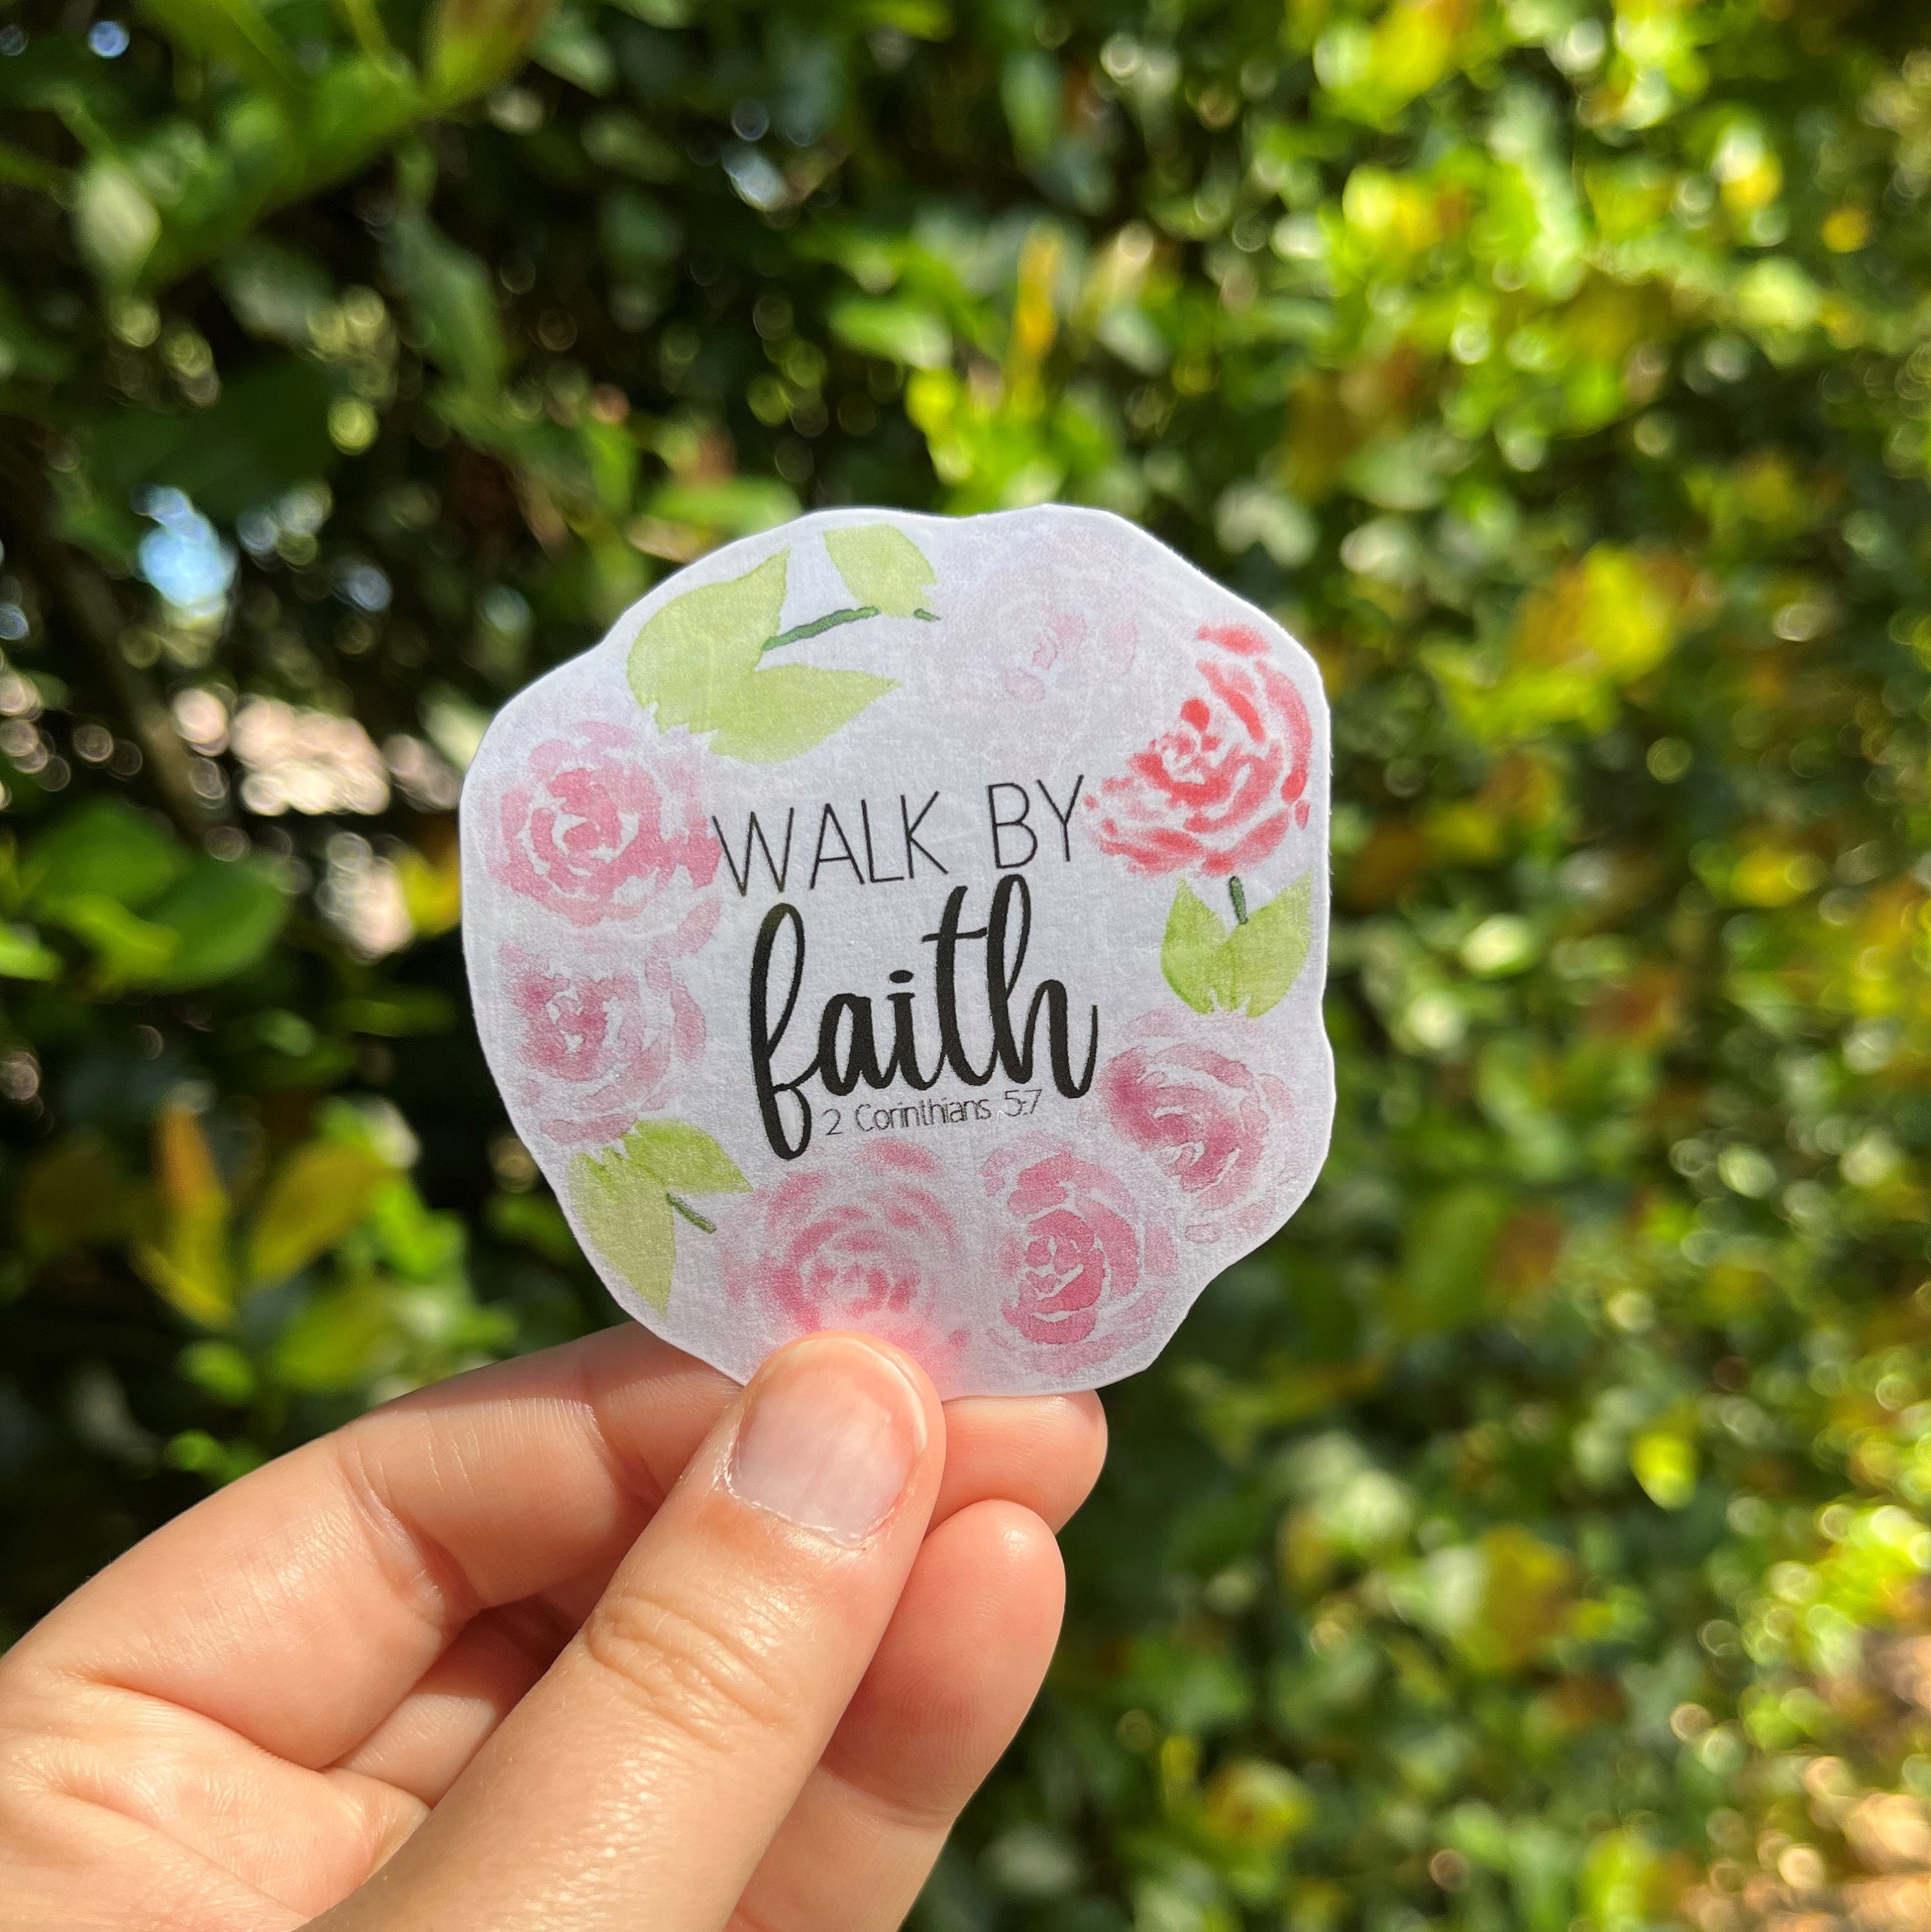 Christian Quote - Walk By Faith Sticker for Sale by ChristianStore